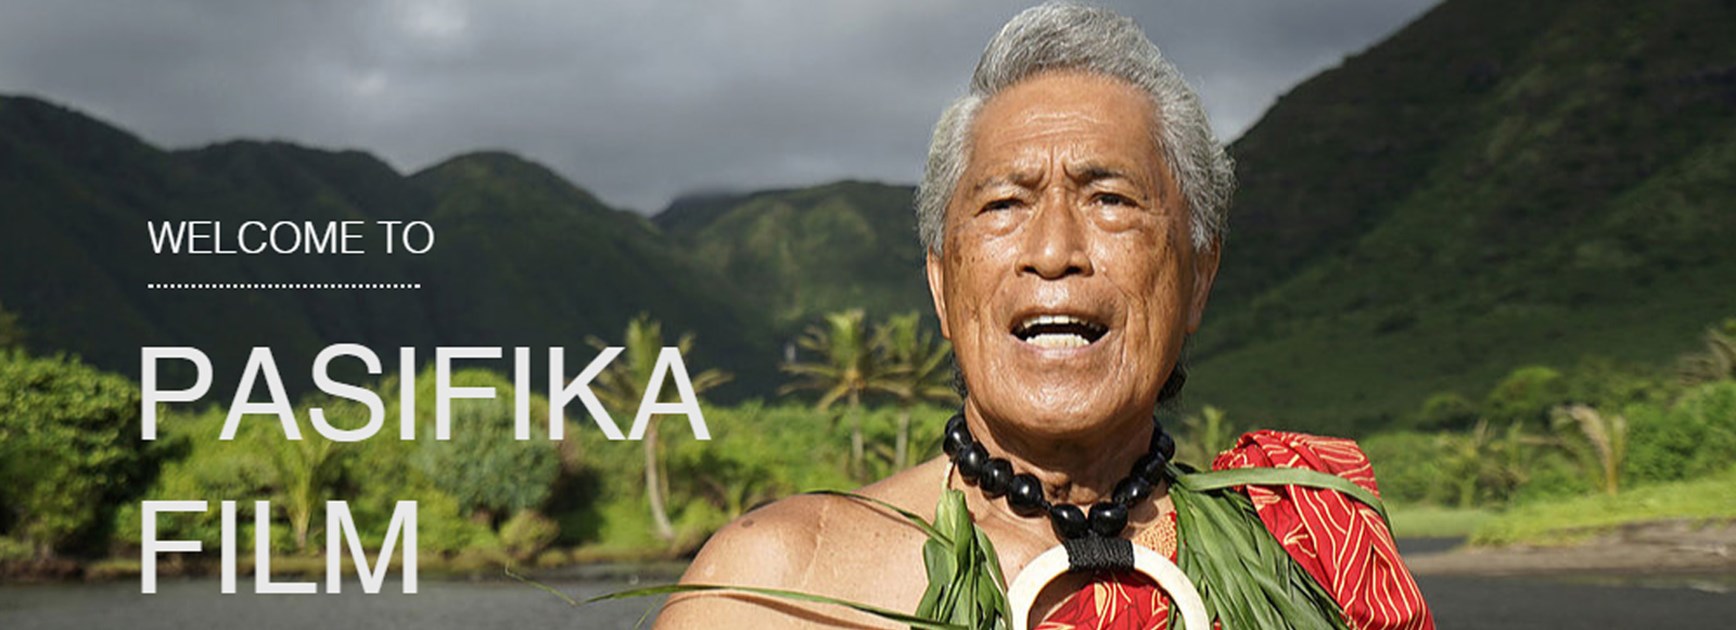 The Pasifika Film Fest takes place in Parramatta and Campbelltown in November.